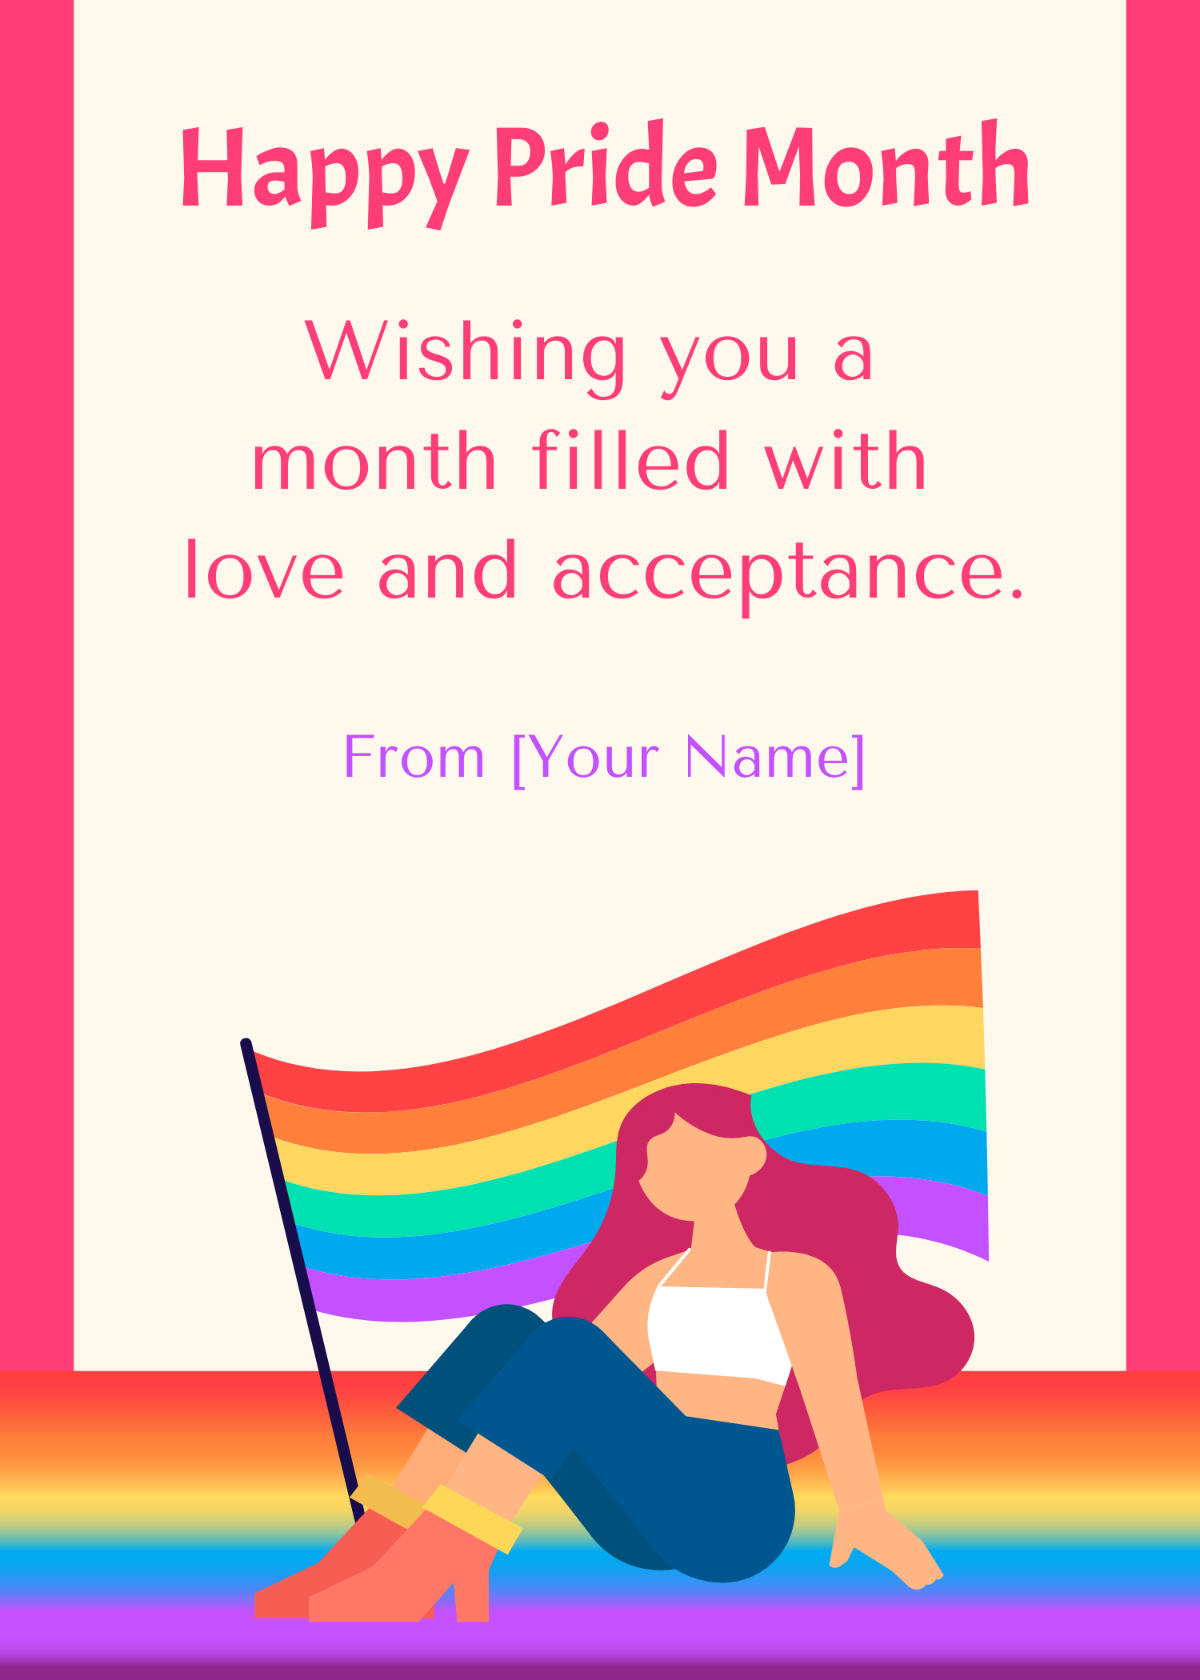 Happy Pride Month Wishes